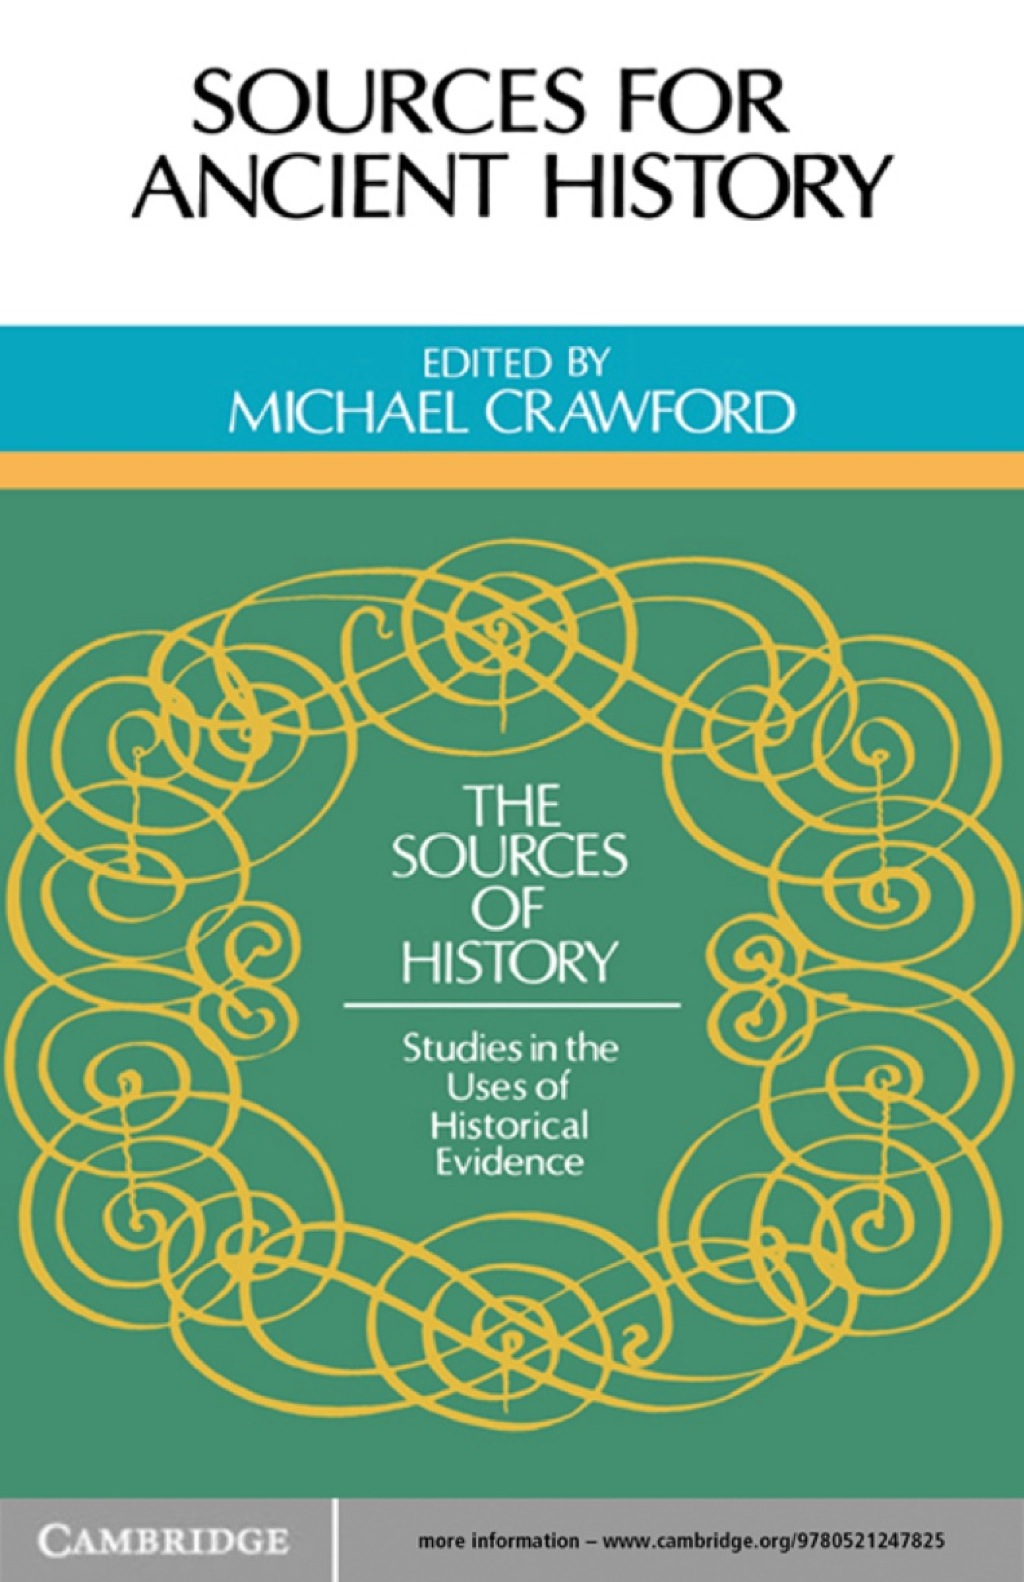 Sources for Ancient History (eBook) - Michael Crawford